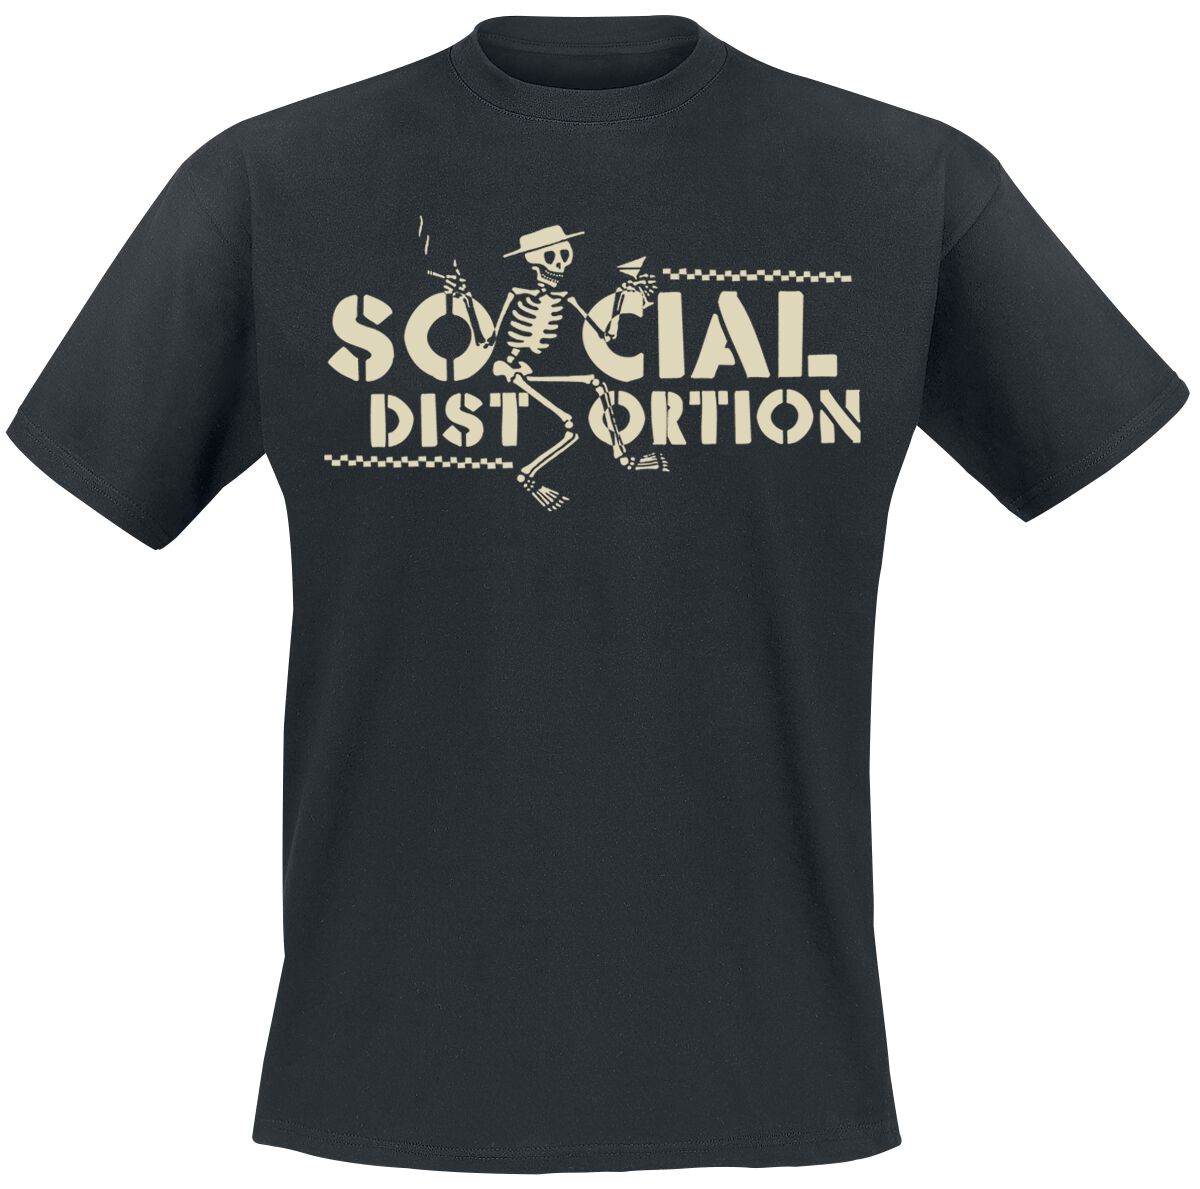 Image of T-Shirt di Social Distortion - Checkered Skellie - S a XXL - Uomo - nero